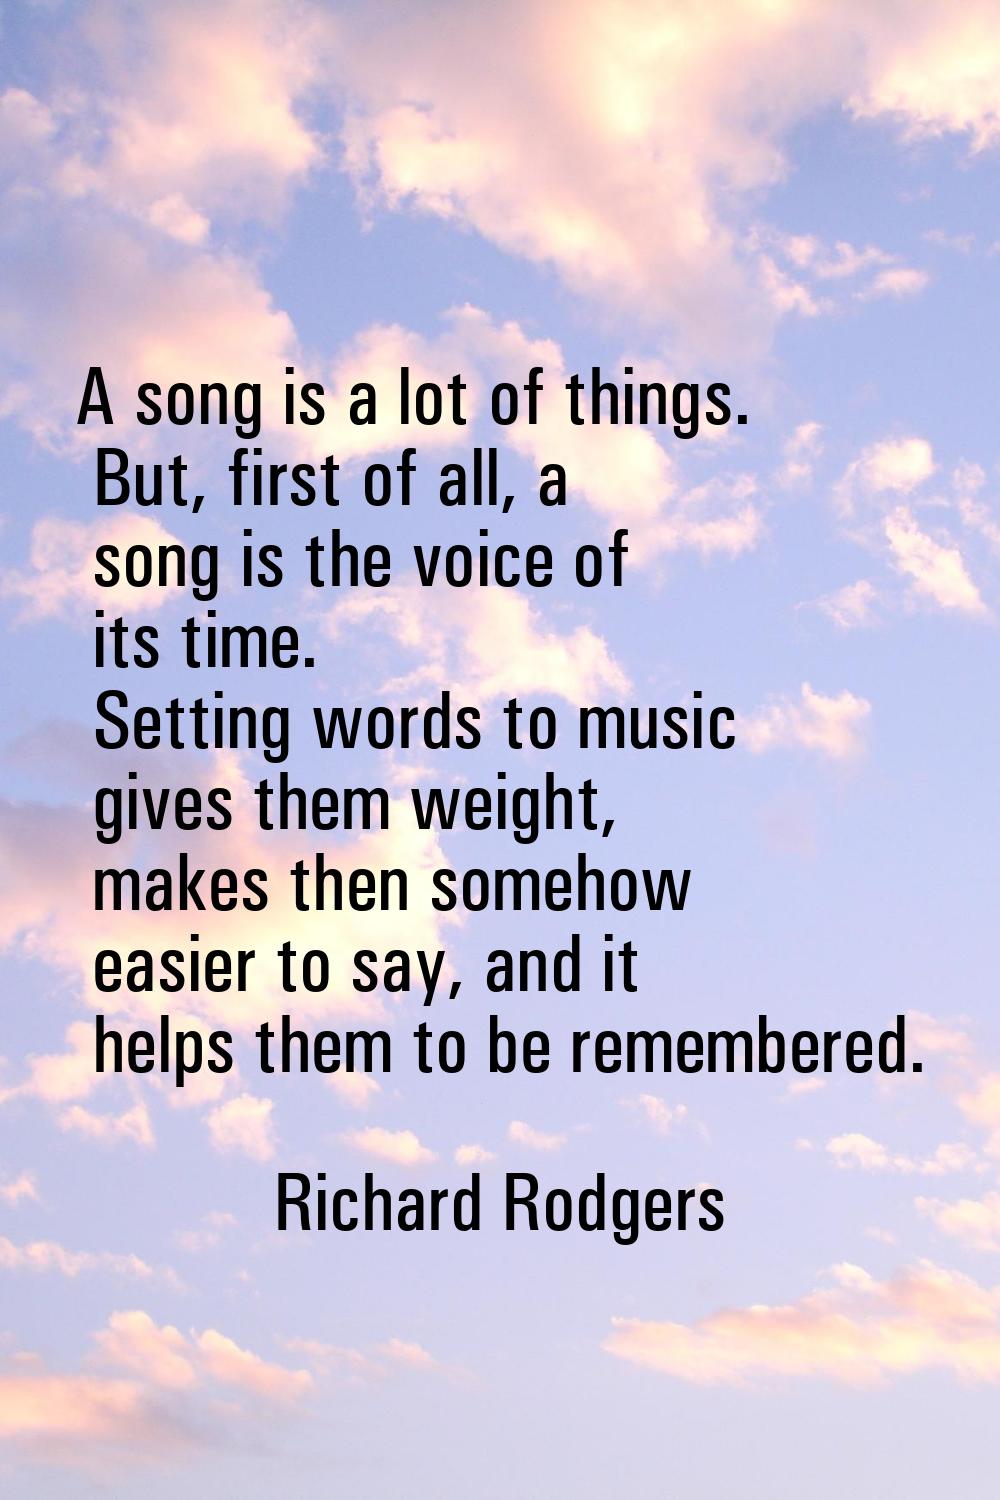 A song is a lot of things. But, first of all, a song is the voice of its time. Setting words to mus